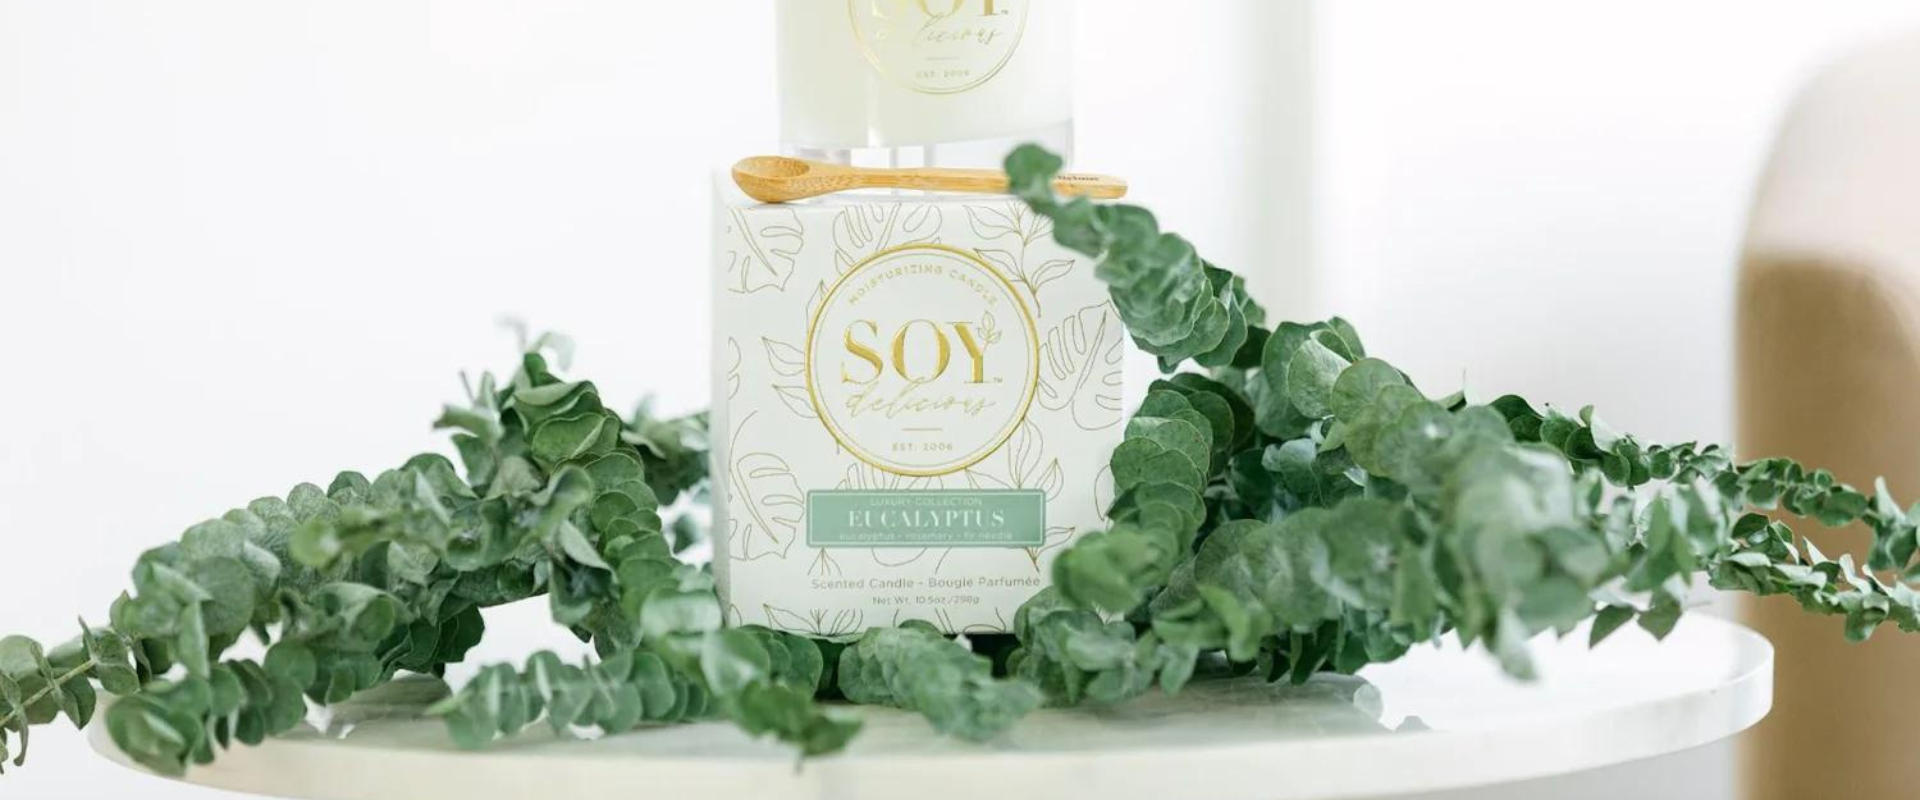 Benefits of Soy Wax Candles -Healthier, Fragrant, & Eco. Clean